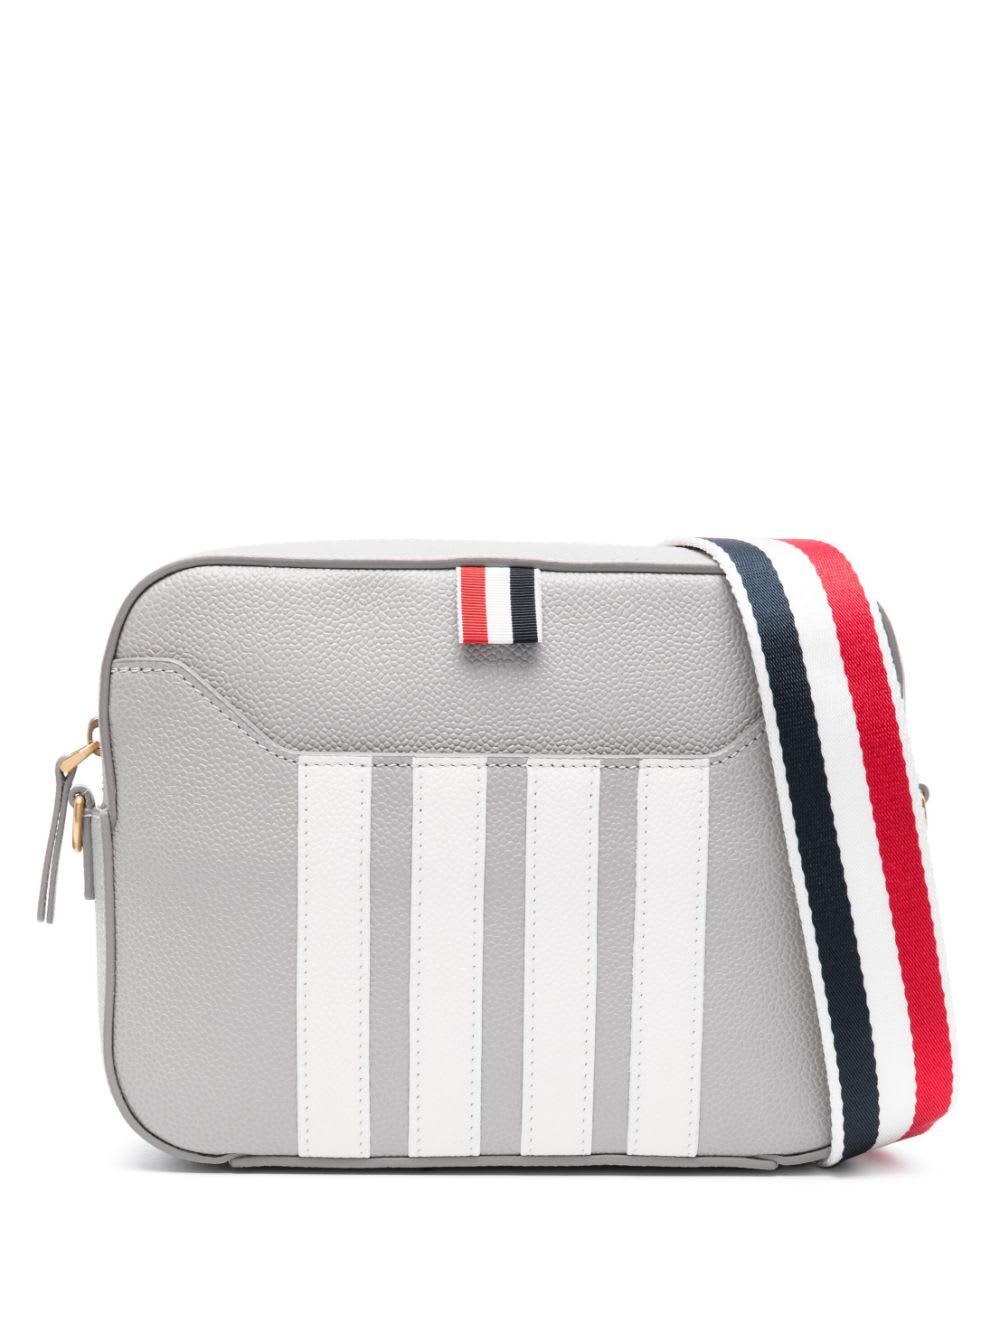 Thom Browne Small Camera Bag With Rwb Strap & 4 Bar Stripes In Pebble Grain Leather In Lt Grey